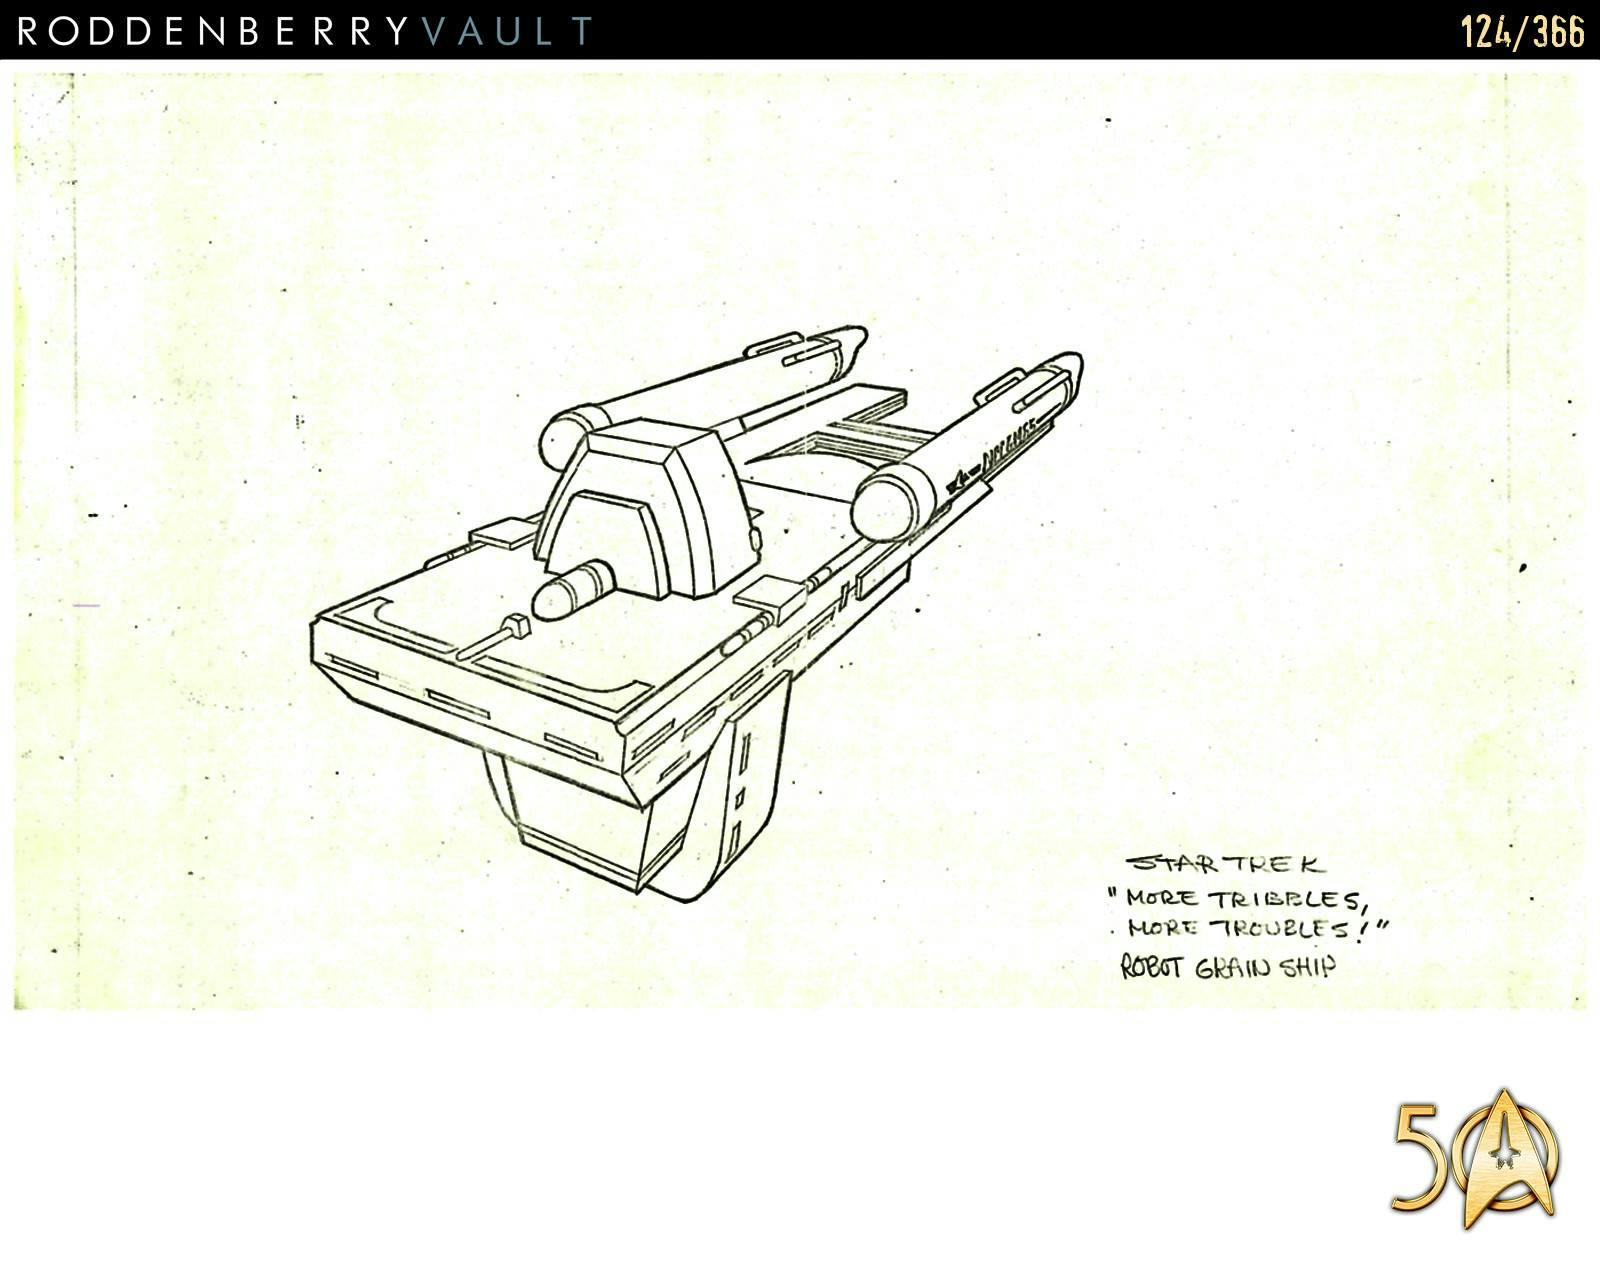 From the Roddenberry 366 Vault - The Animated Series - robot grain ship concept art from 'More Tribbles, More Trouble'